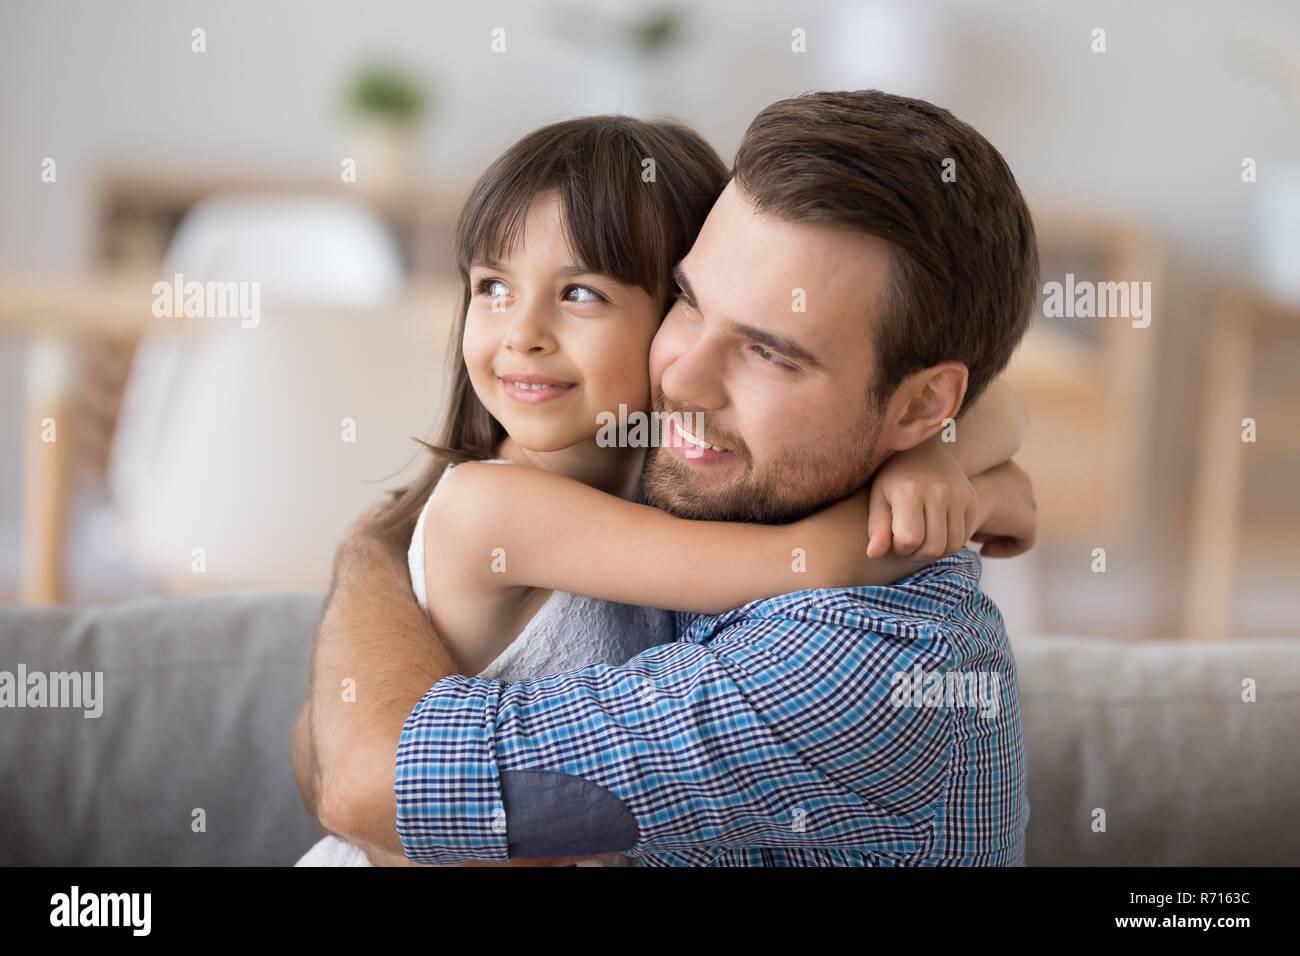 Father and daughter embracing sitting on couch looking at camera Stock Photo